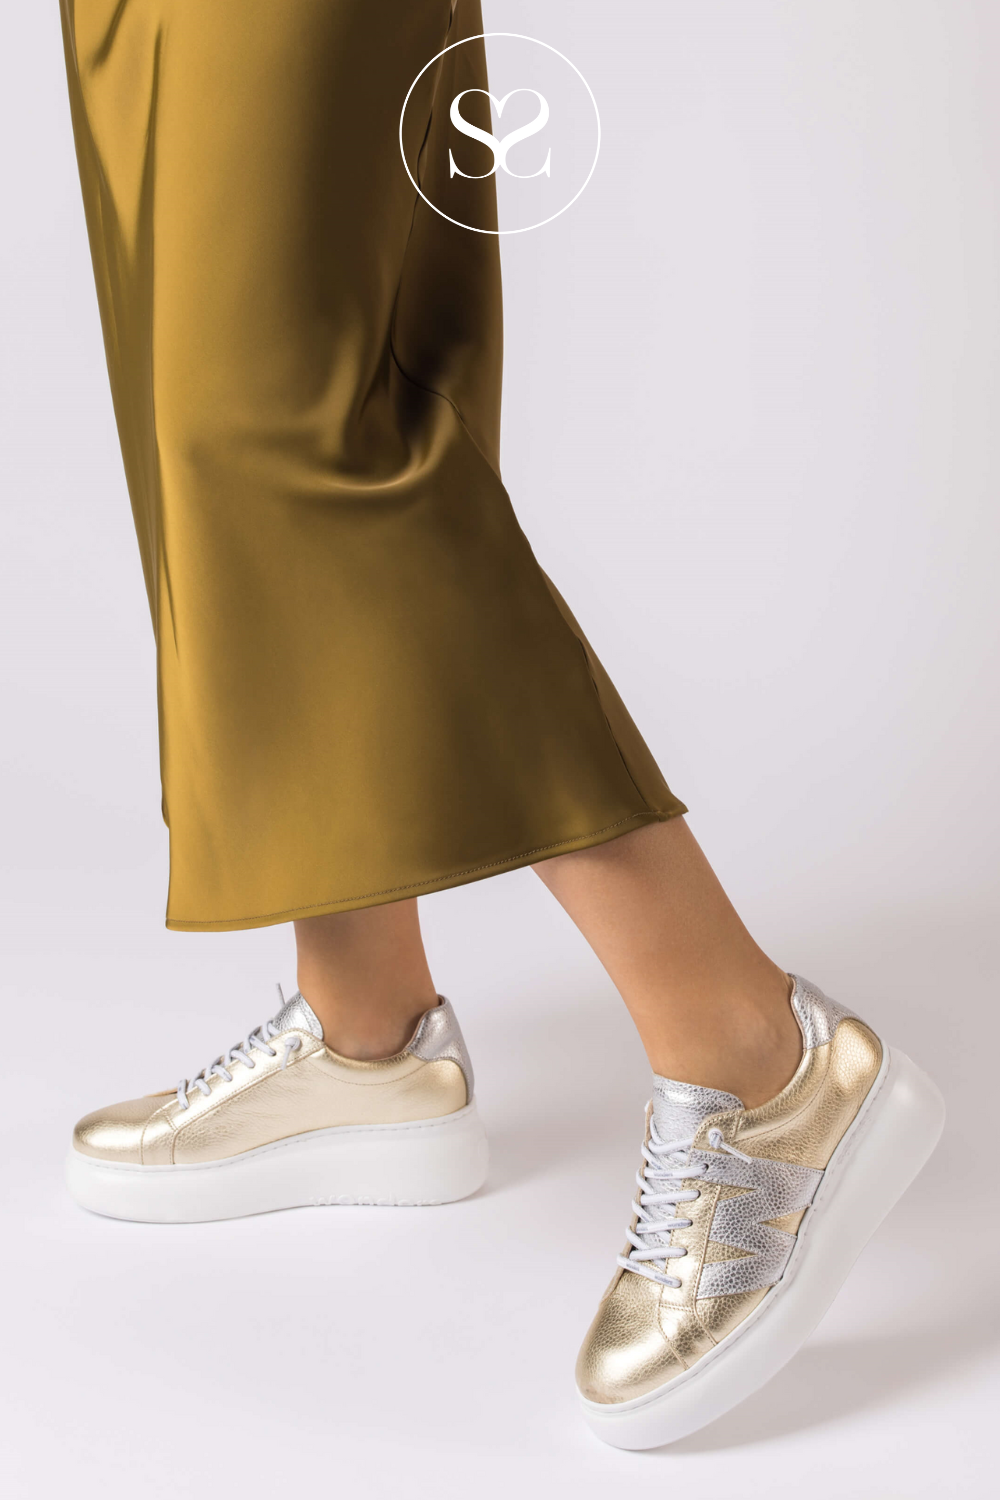 WONDERS A-2650 GOLD LEATHER FLATFORM TRAINERS WITH SILVER WONDERS BRANDING ON THE SIDE AND A WHITE SOLE